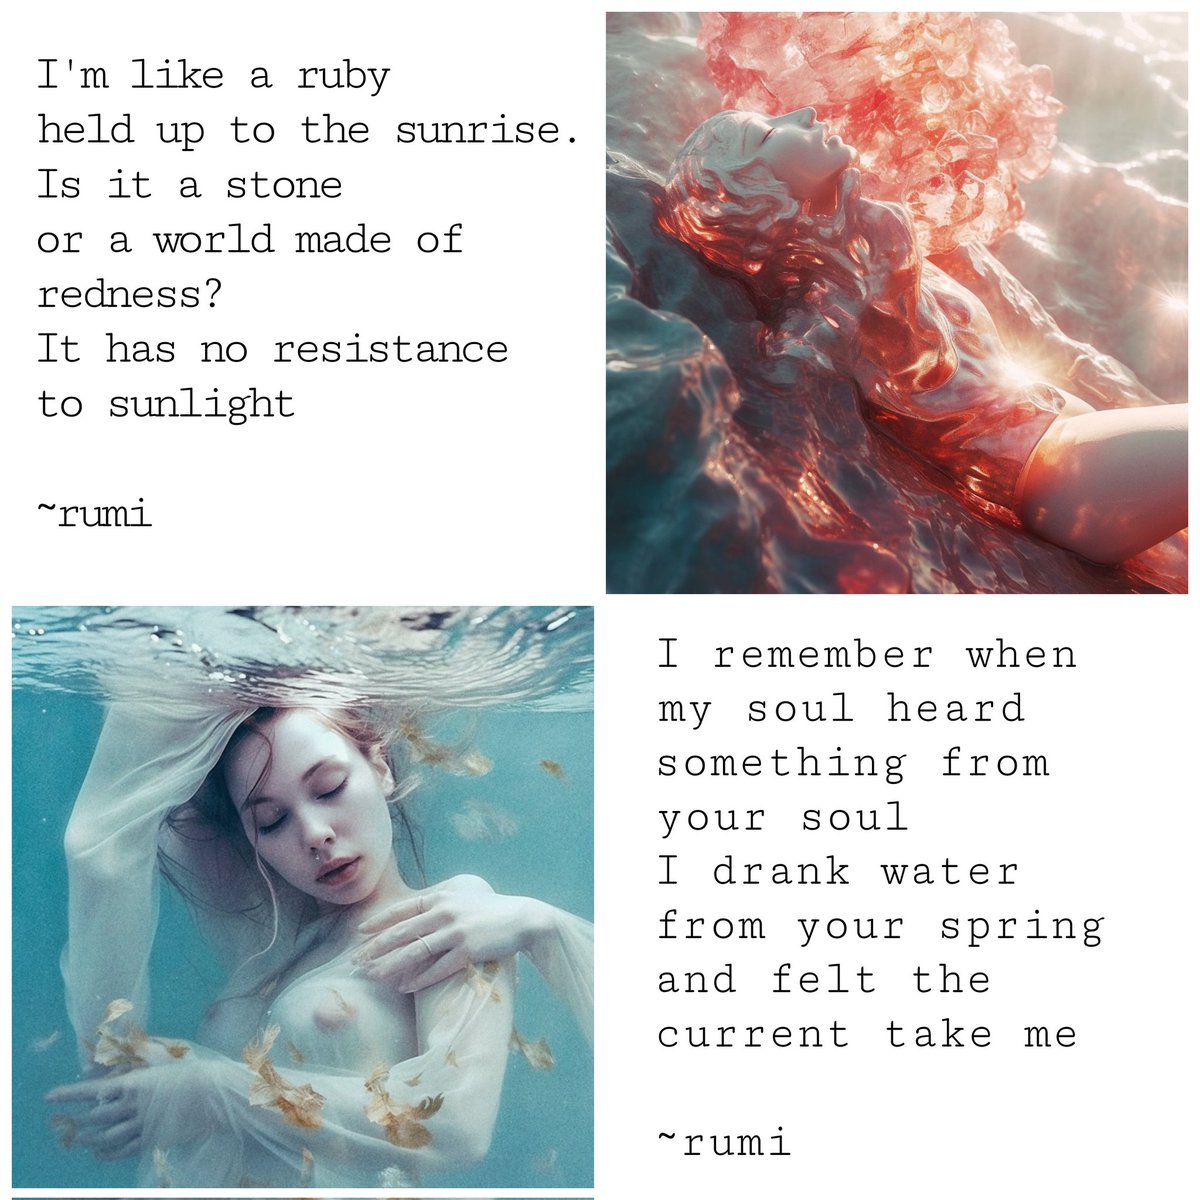 Gm Lovers! 💙❤️

April is National Poetry month & I'm continuing my daily  #poetryprompts w midjourney.

I love exploring lines from my fav poems visually...

Right now I'm fascinated w 🌊 as a transformative element so I add a specific body of water to my prompts.

I wonder what